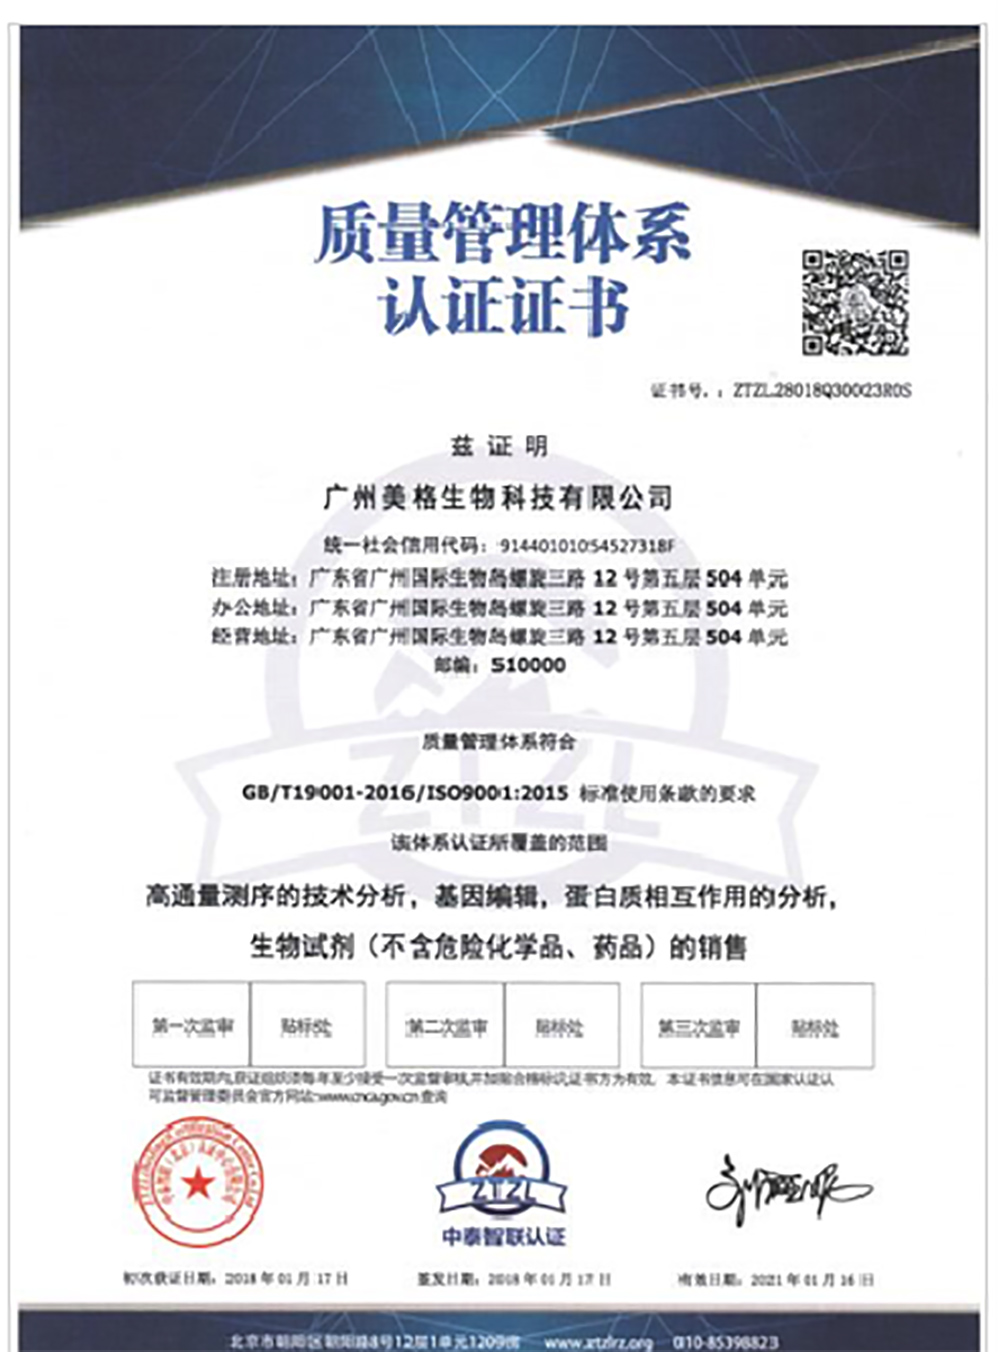 Product Certificate 